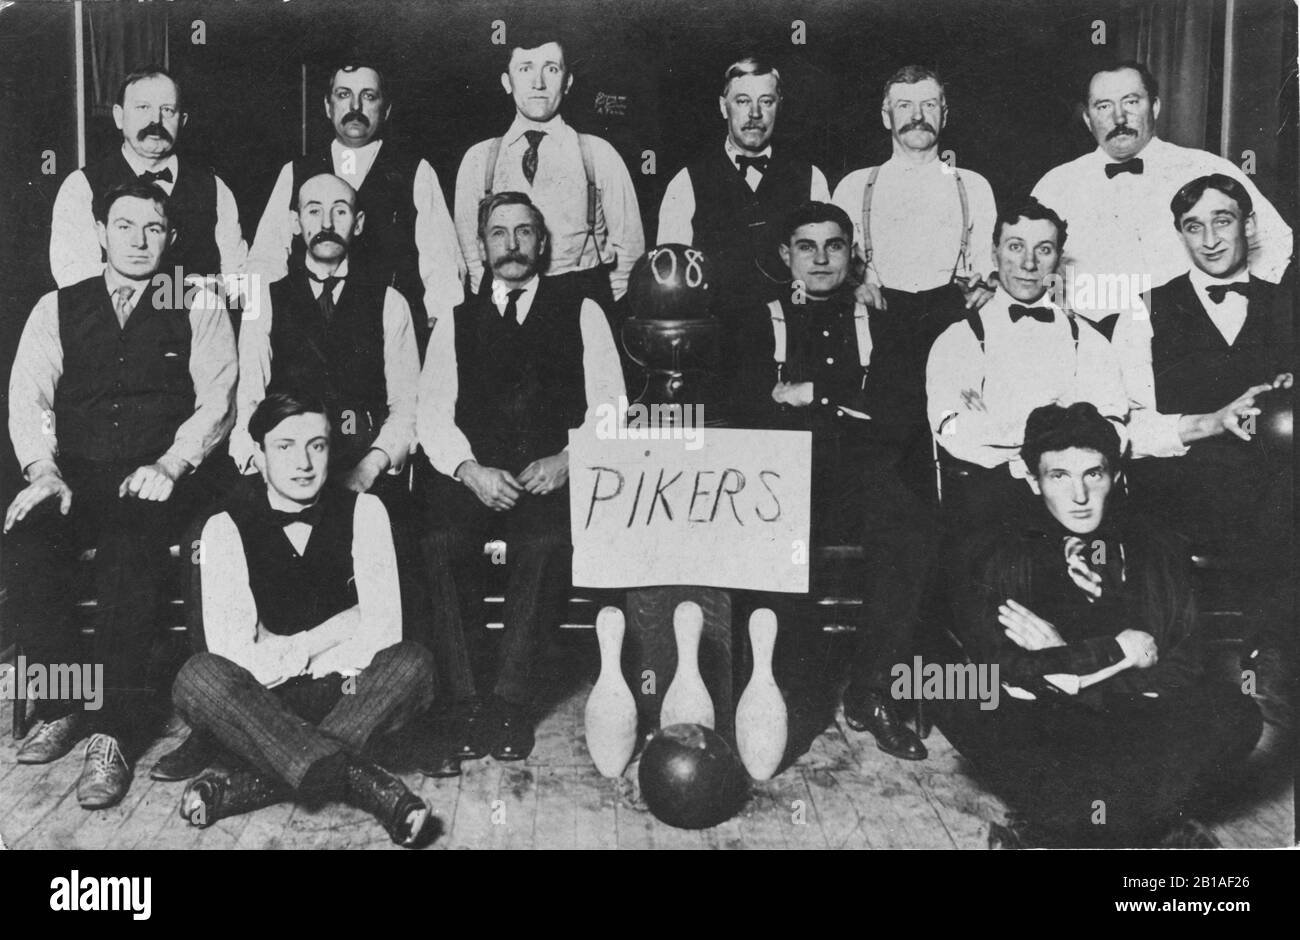 Bowling team, the 'Pikers' in 1908, in Milwaukee, Wis. This is 14 men around three pins, their team name and the bowlers' end of the ball return. There ar 3 bowling balls in the photo.  Men are all dressed in black and white, some with suspenders. Many mustaches on serious faces.  To see my other sports-related vintage images, Search:  Prestor  vintage  sport Stock Photo